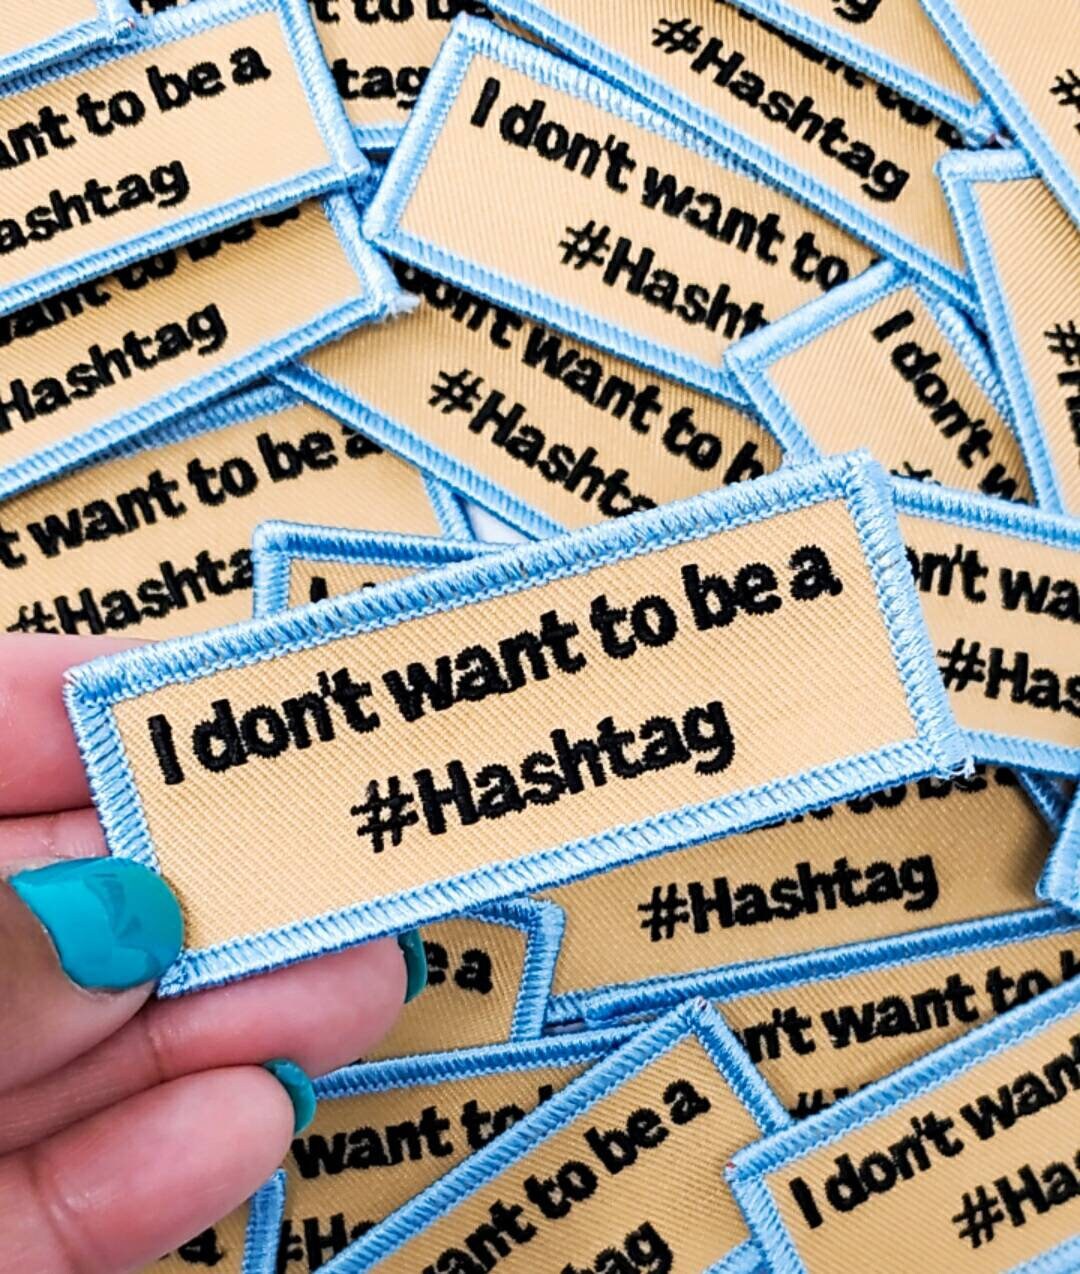 Exclusive,"I Don't Want to Be a Hashtag" Badge, Iron-on Embroidered Patch, Craft Supplies, Small Patch, 3" x 1", Black Lives Matter